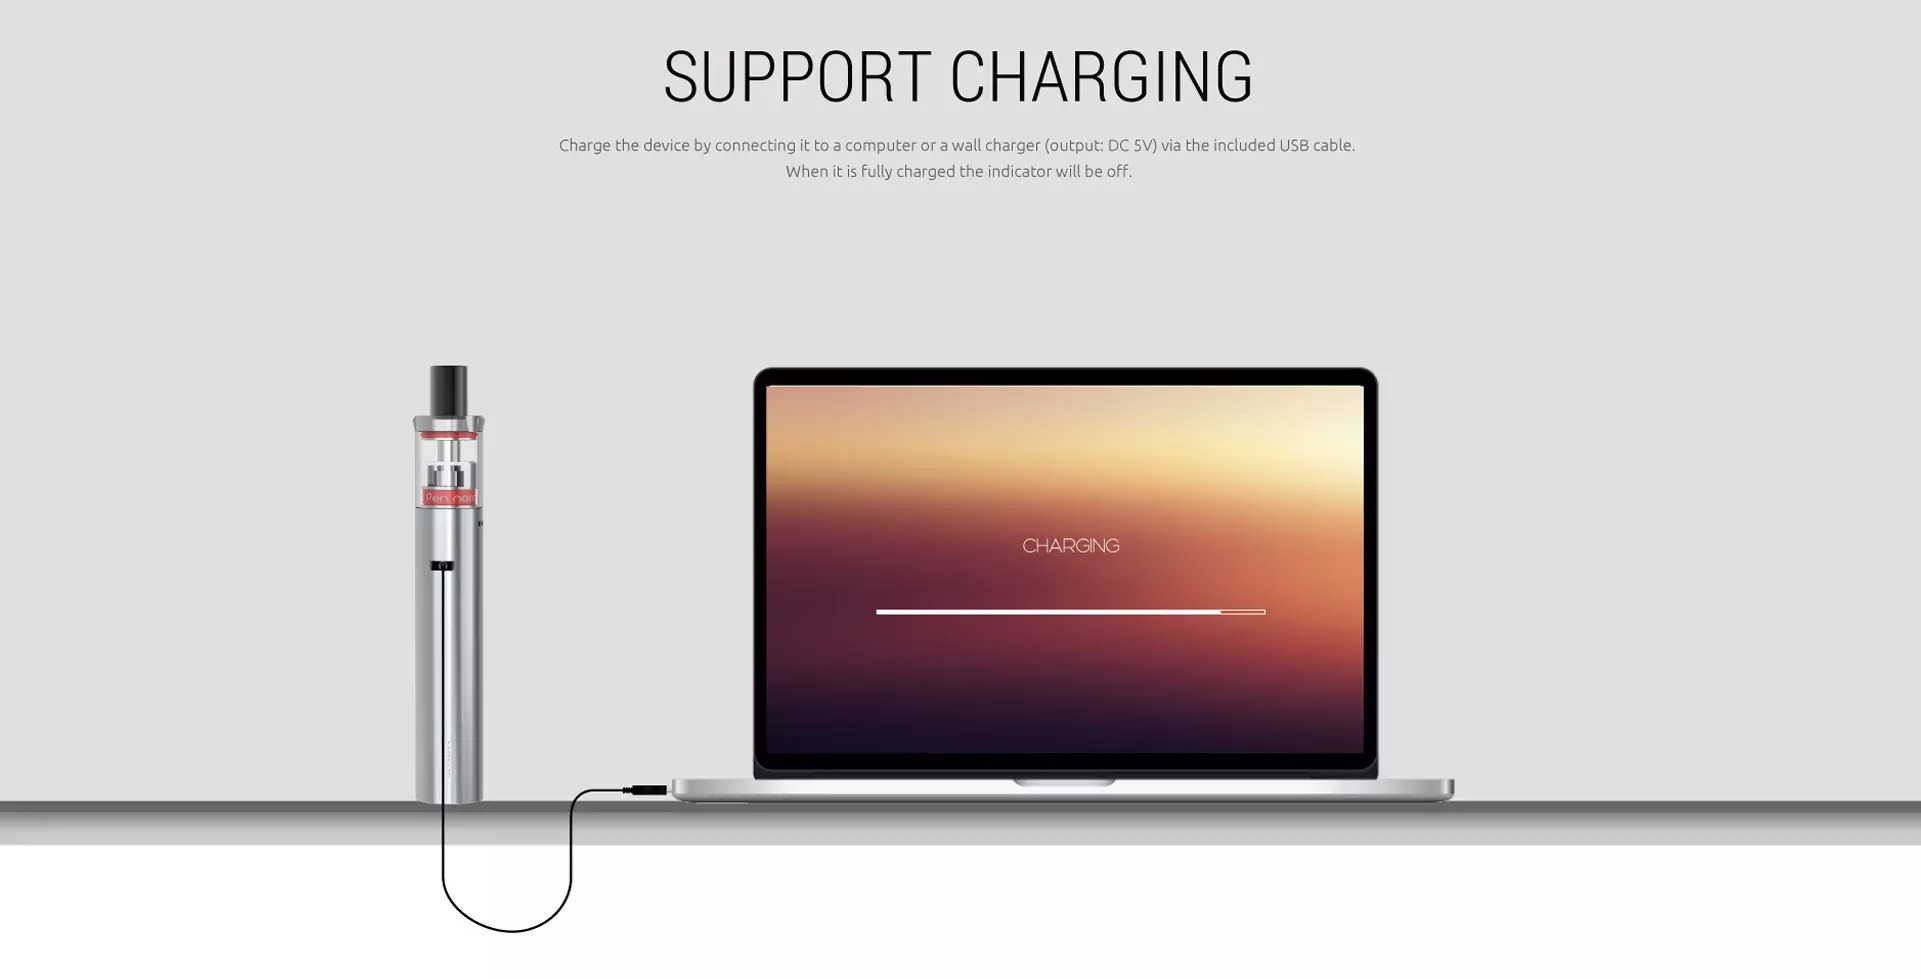 16. Charging support